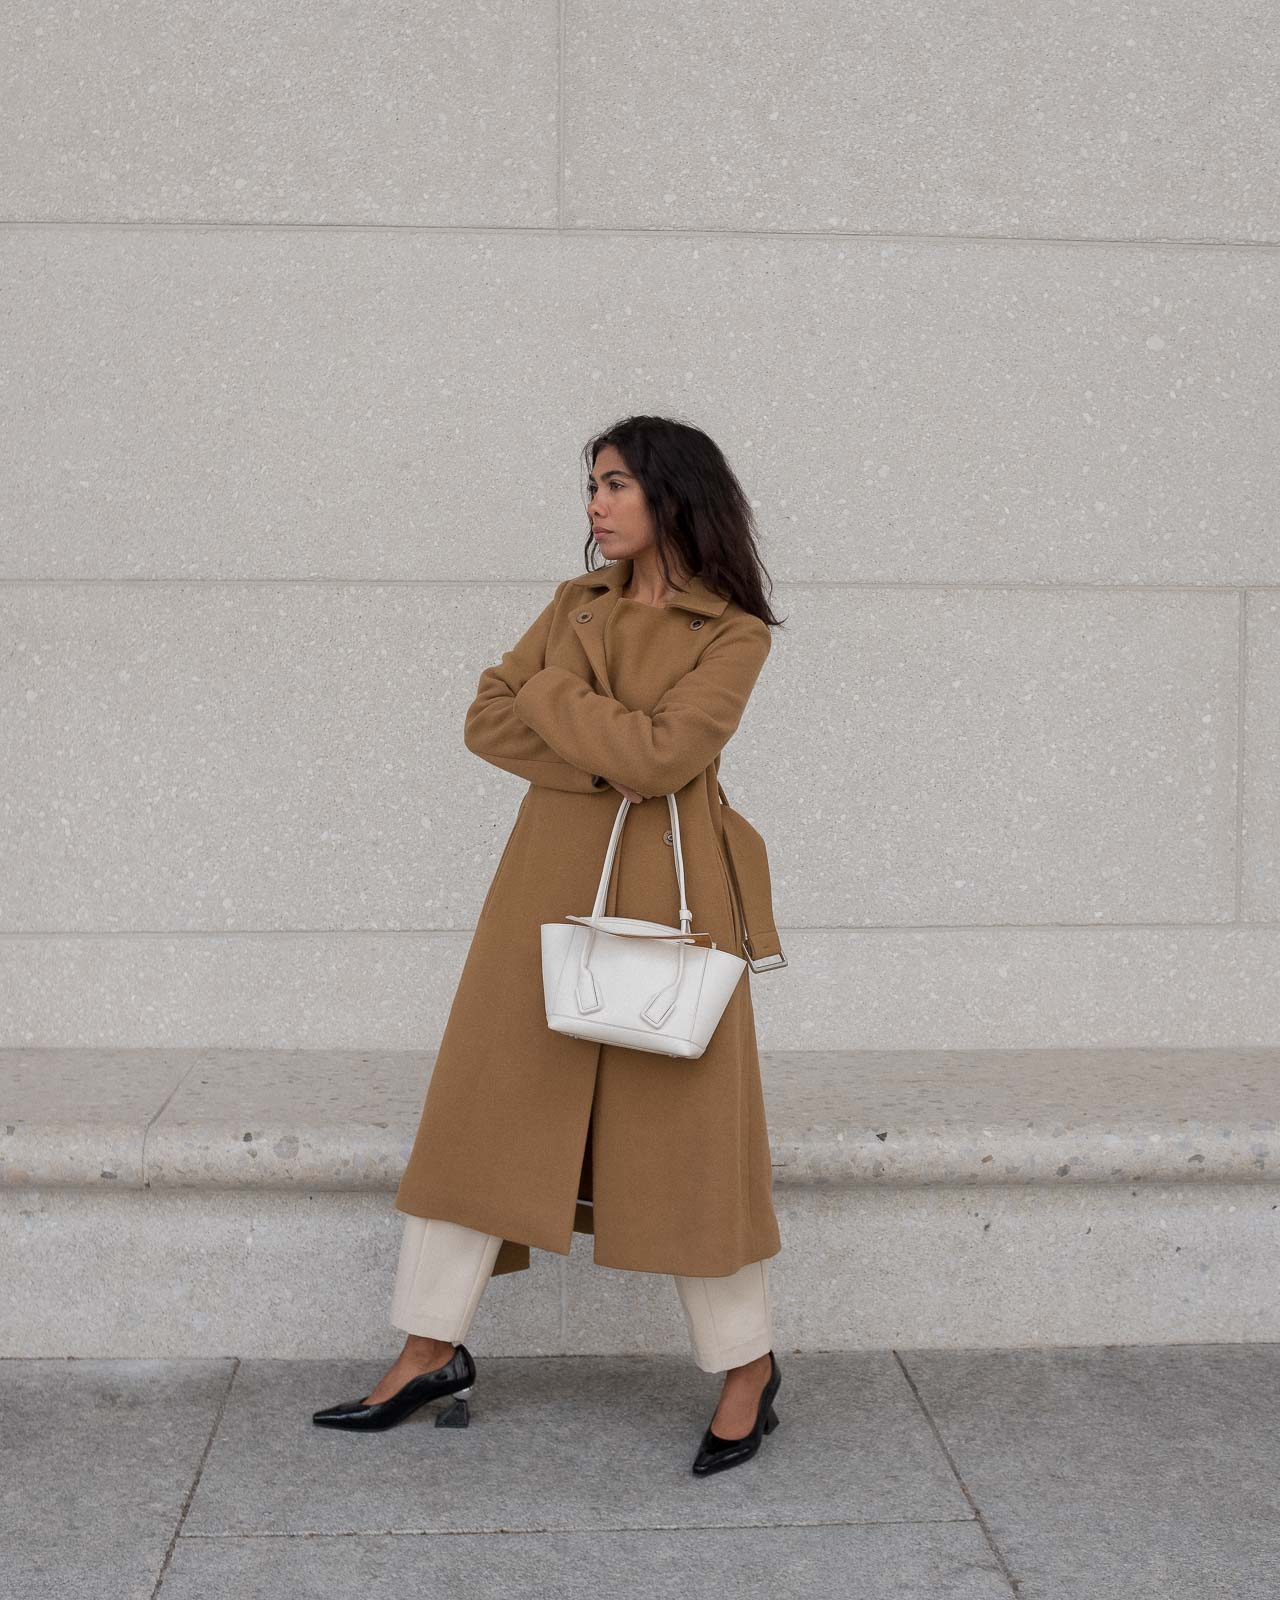 storm wears white bottega veneta arco bag with yuul yie black mules combined with by malene birger camel coat